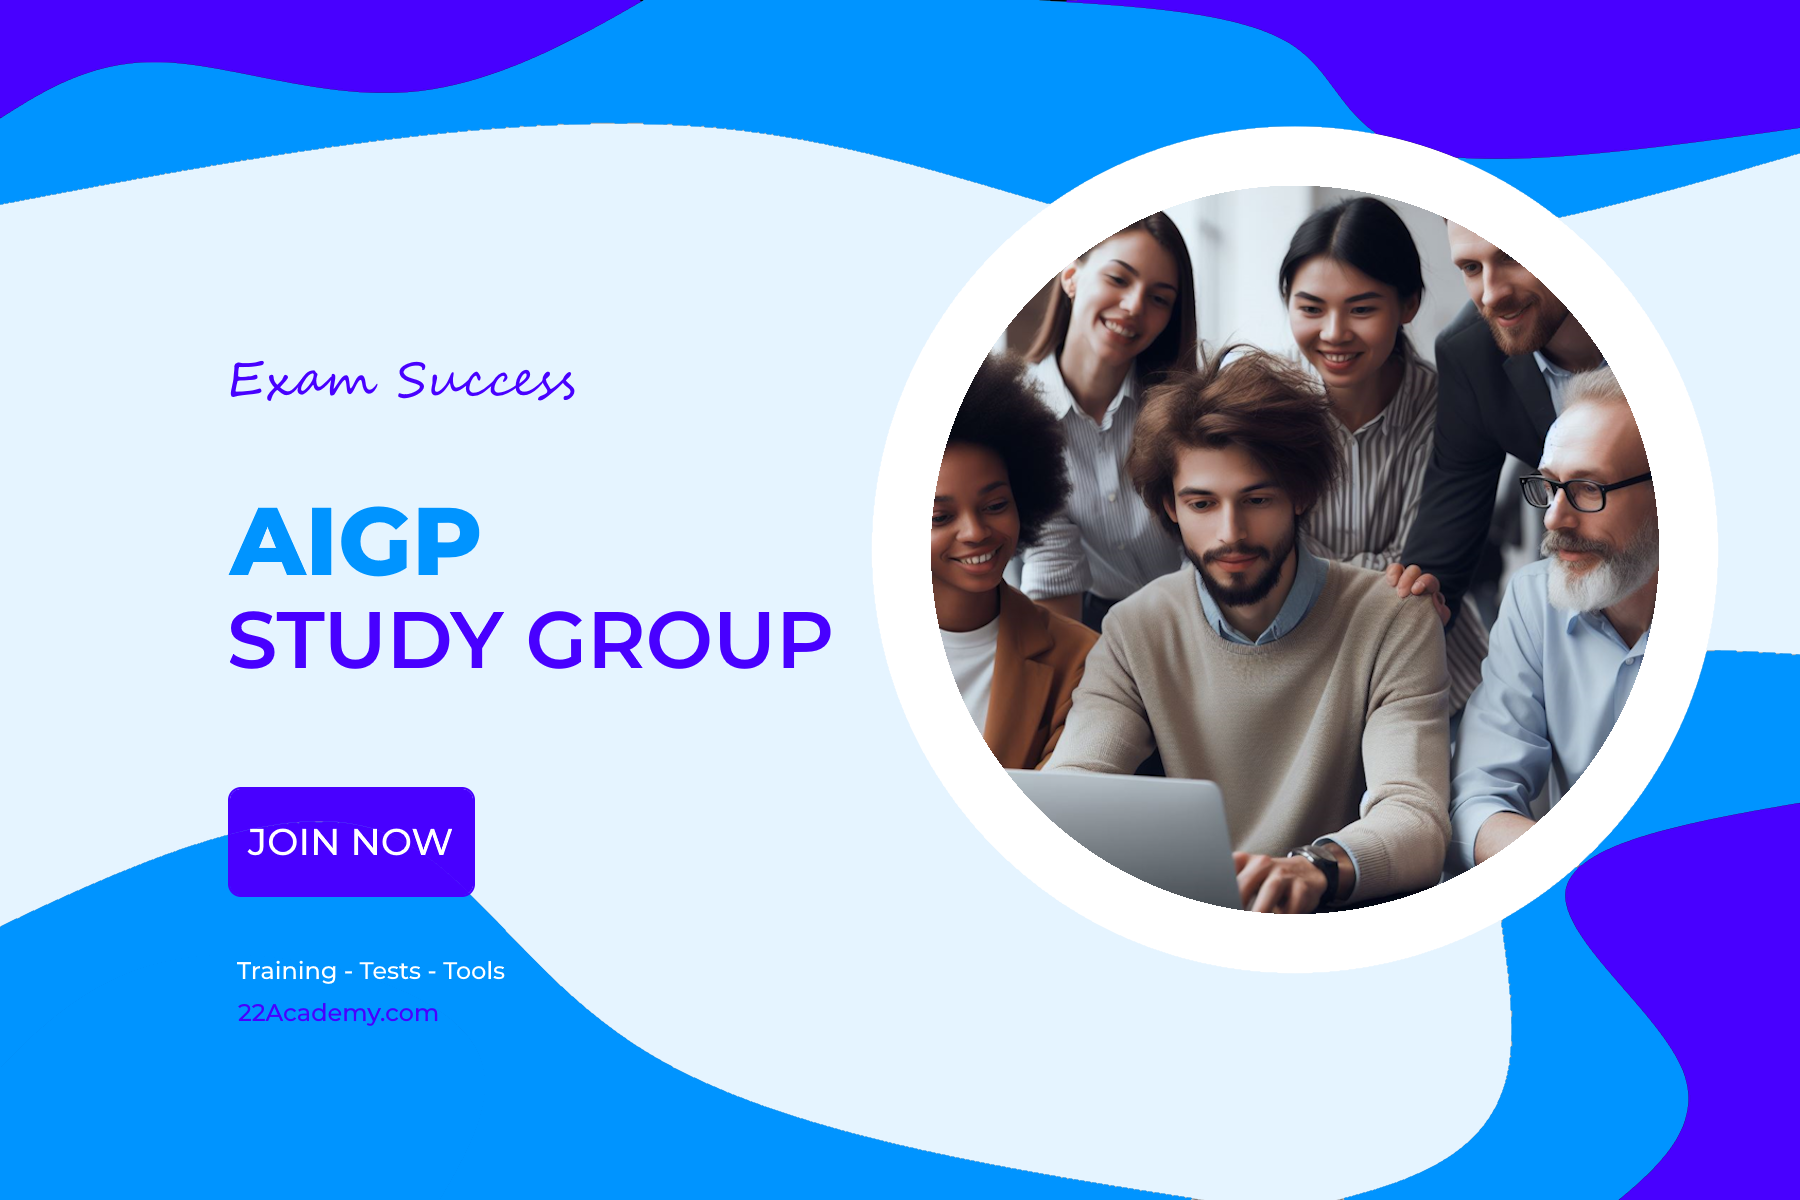 The AIGP Study Group